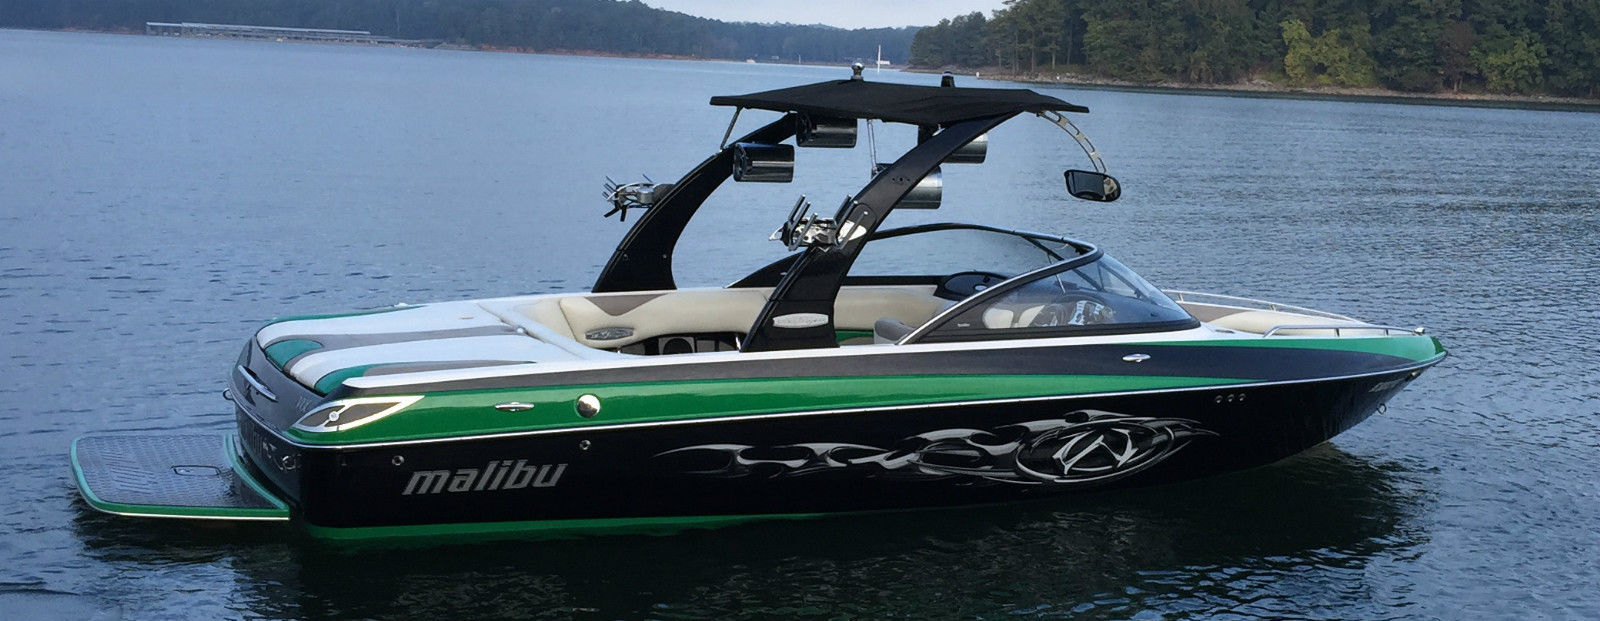 Malibu Wakesetter VLX 2006 for sale for $38,000 - Boats-from-USA.com